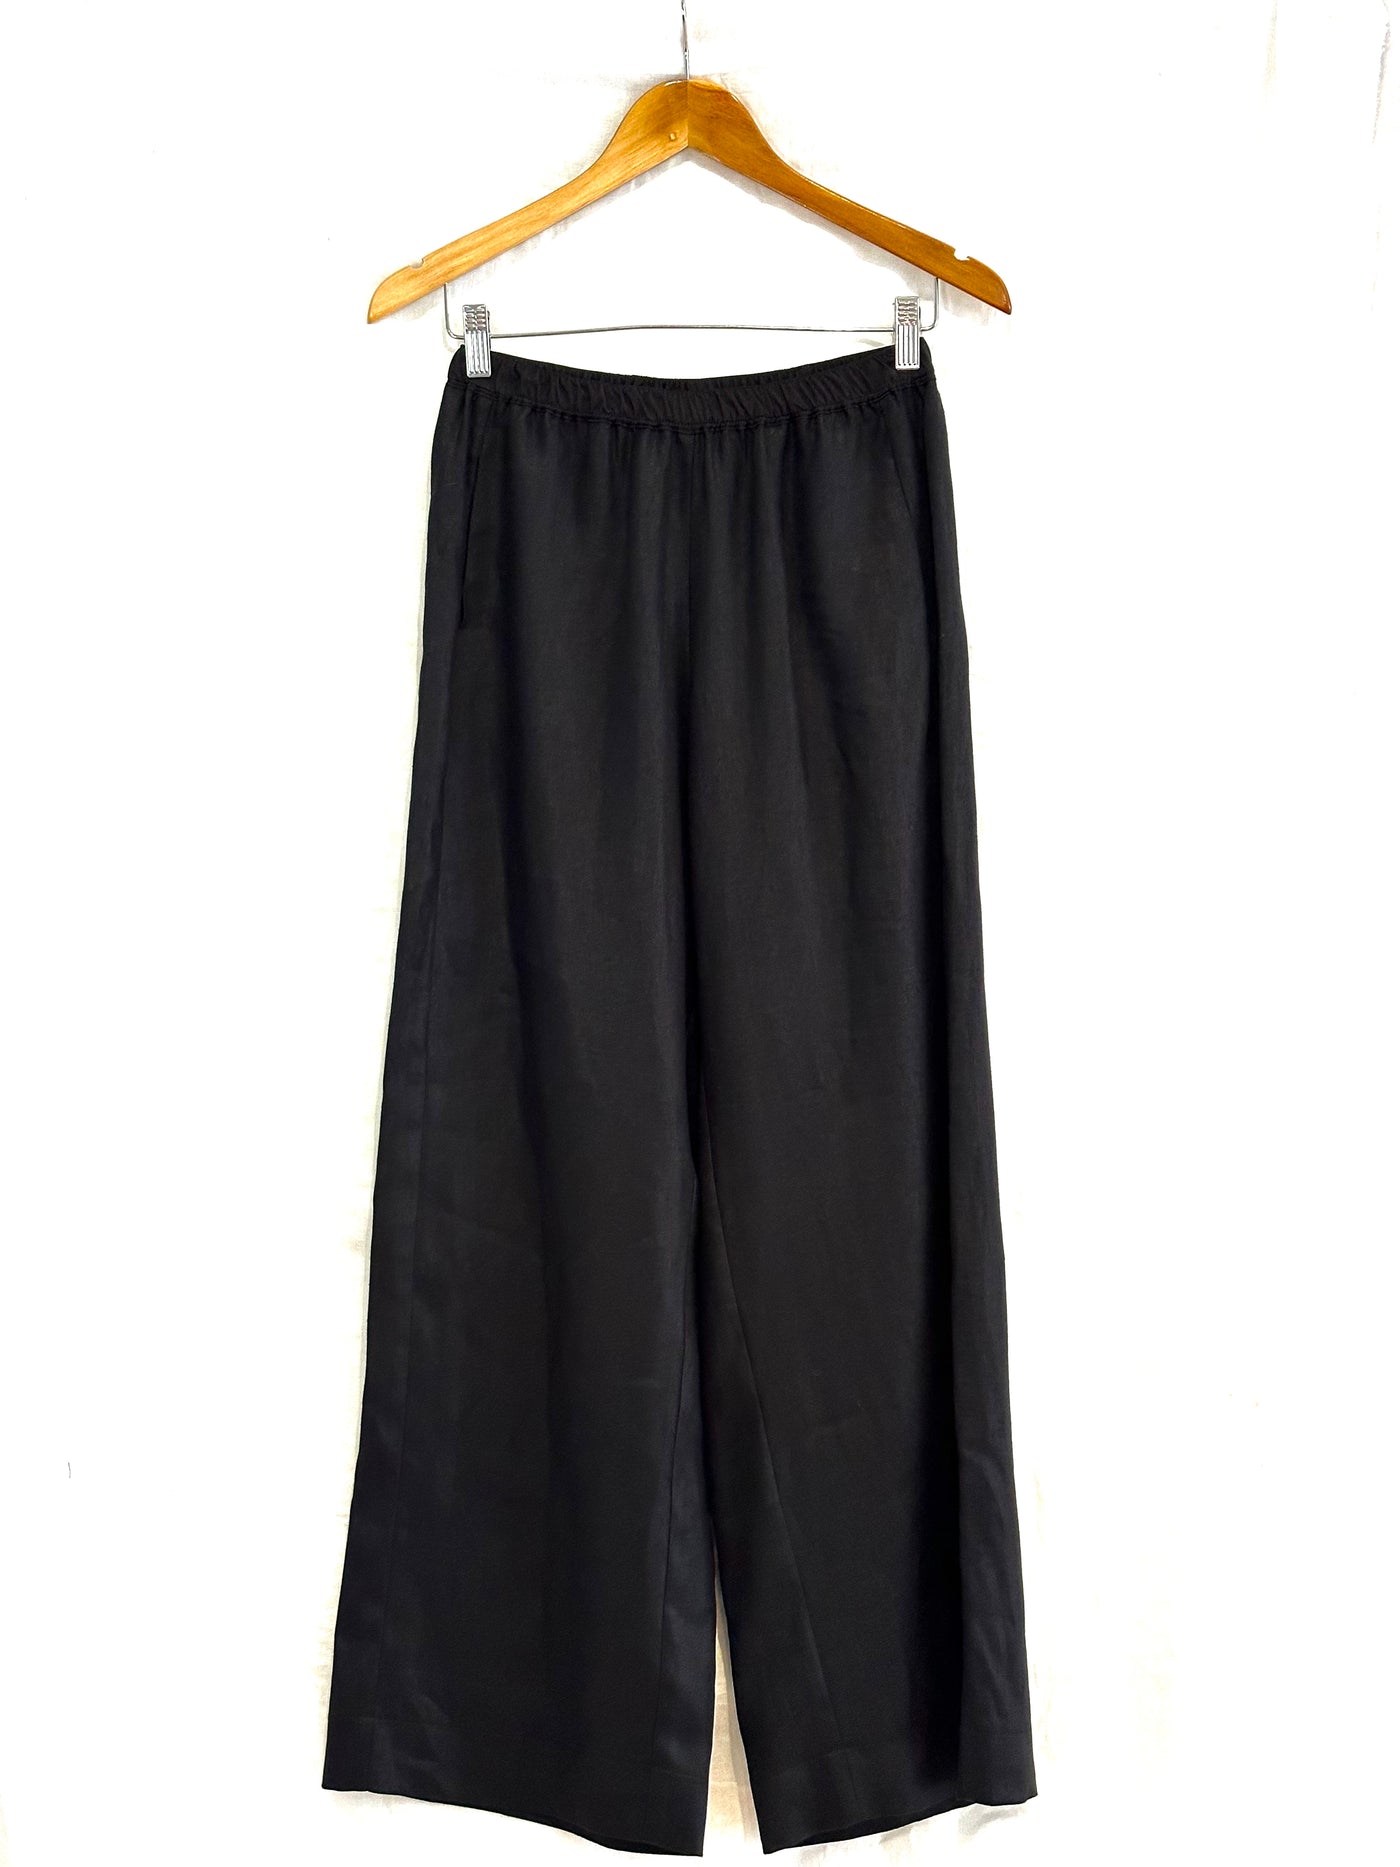 Vale and Ward - Connor pant. Black linen